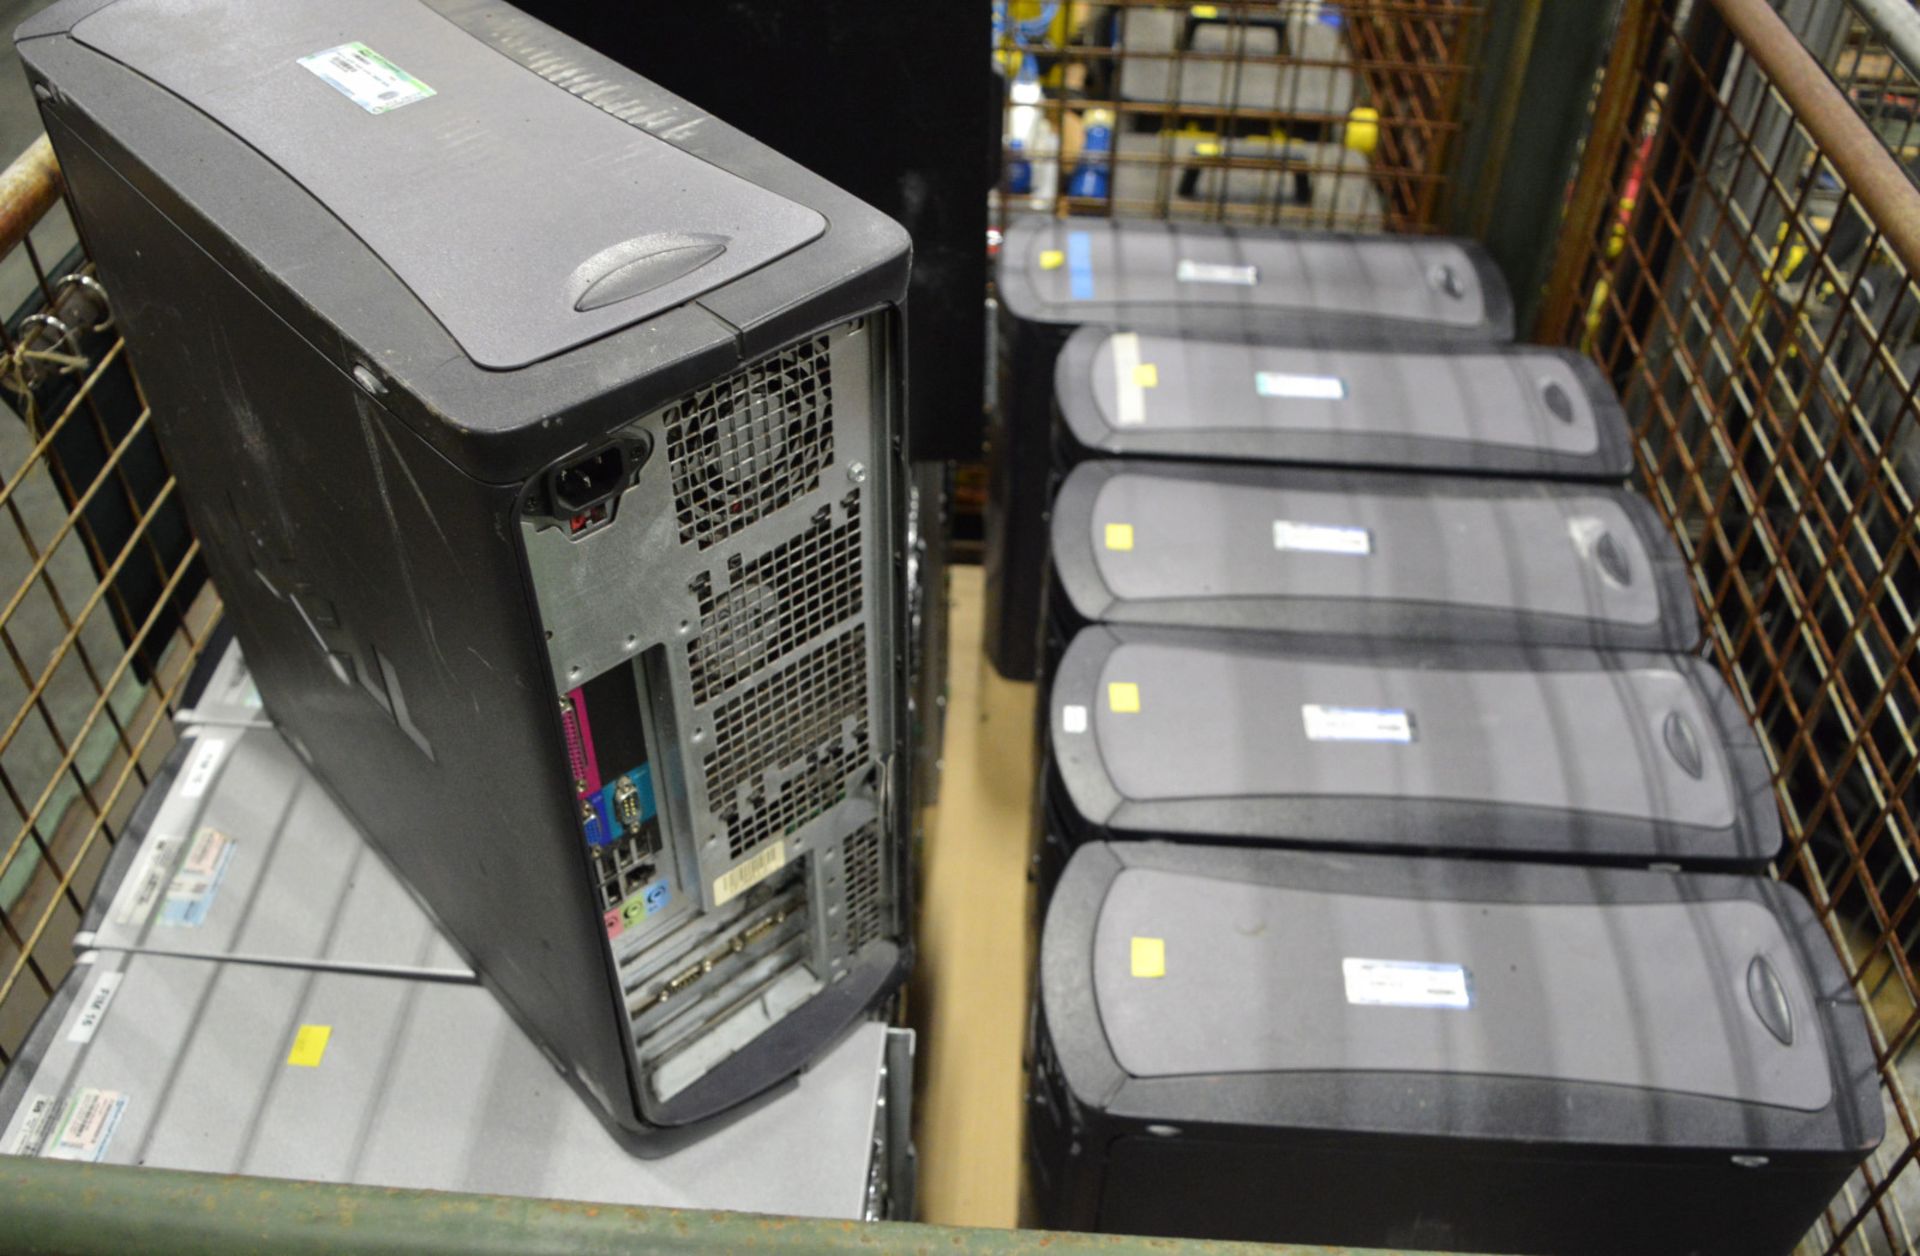 5x HP 4600 Workstations, 6x Dell Tower PCs, 1x HP Compaq 6005 Pro Microtower. - Image 2 of 2